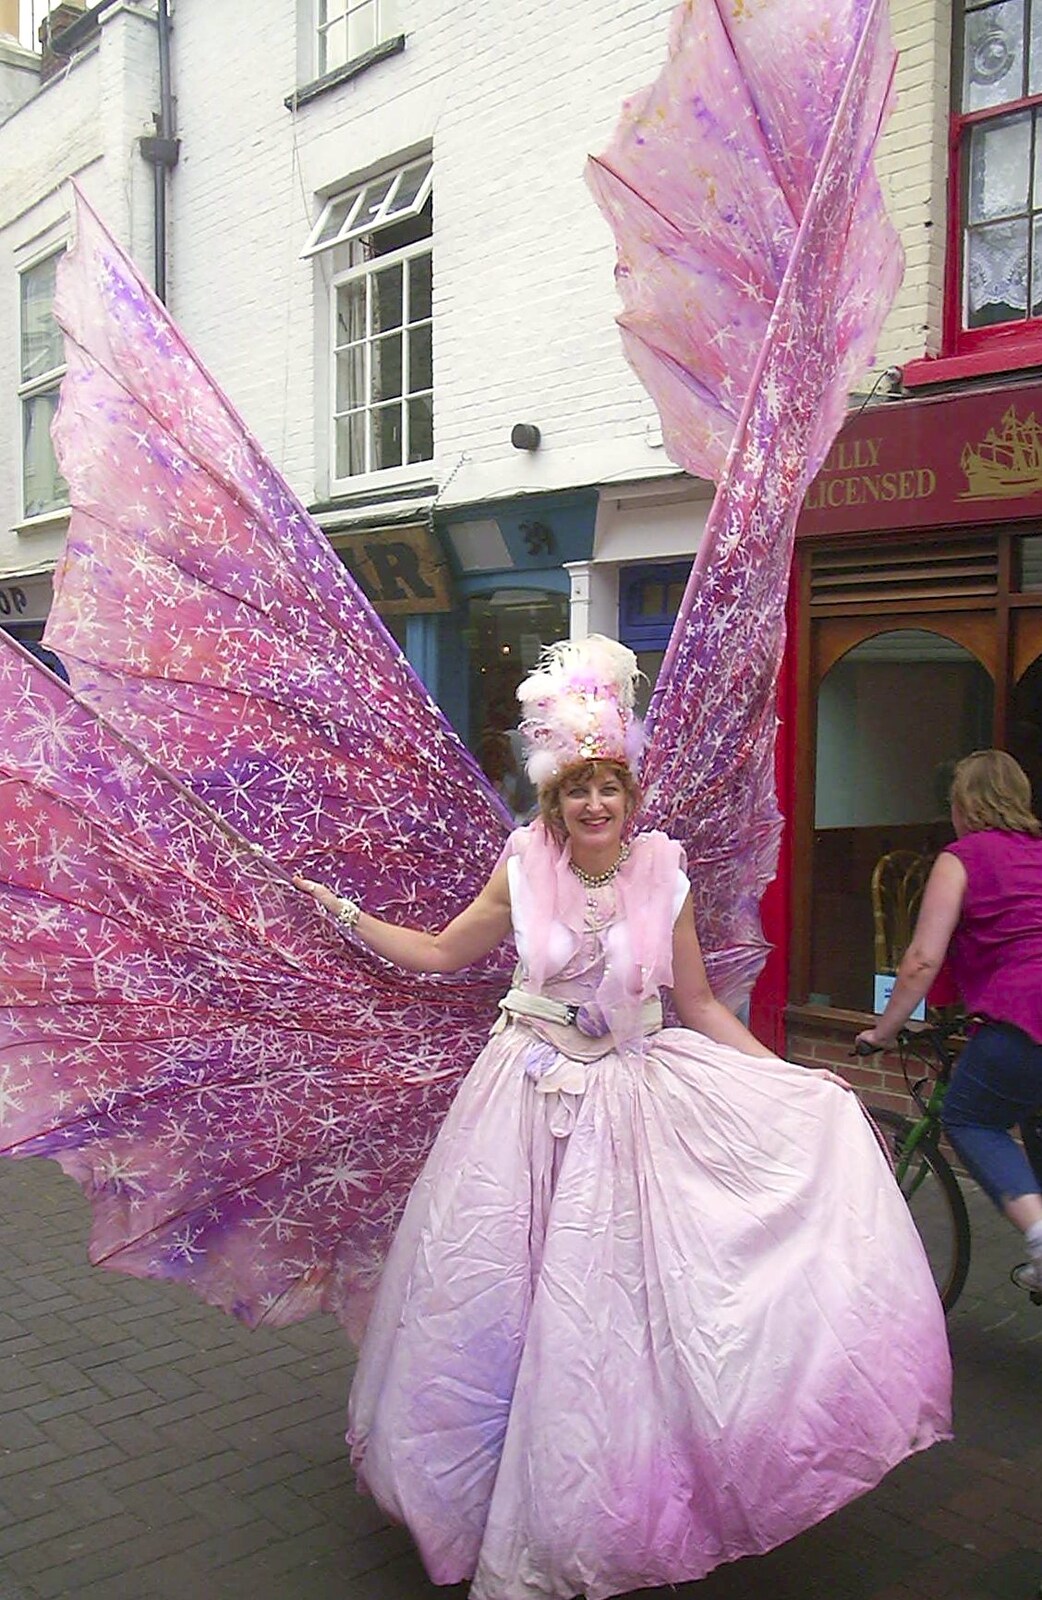 More carnival costumes from Cowes Weekend, Cowes, Isle of Wight - 7th August 2004